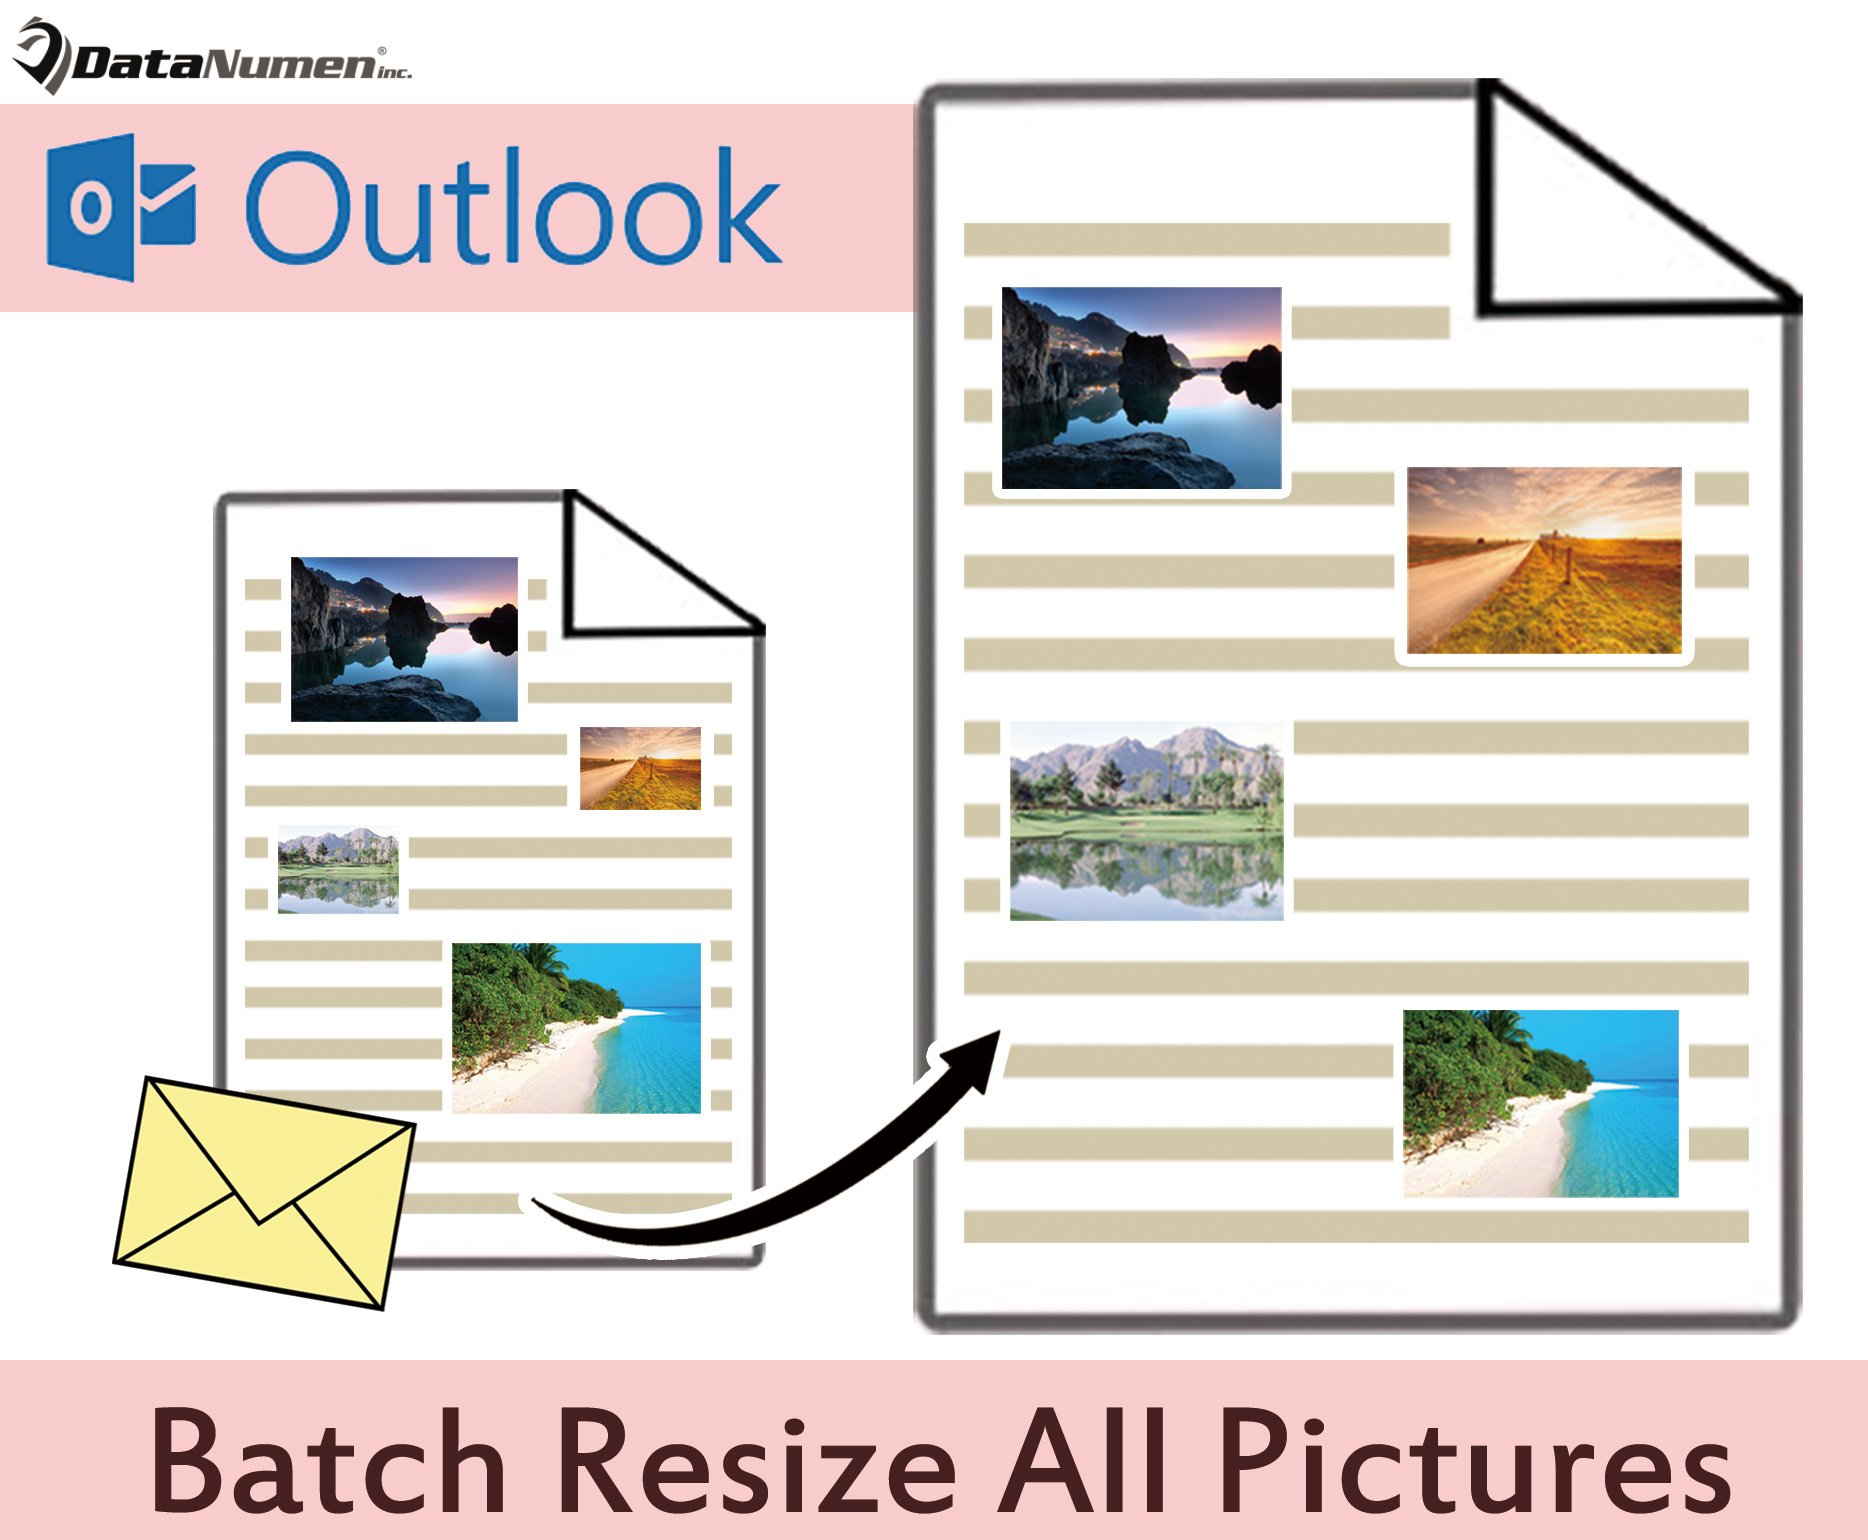 Batch Resize All Pictures in Your Outlook Email